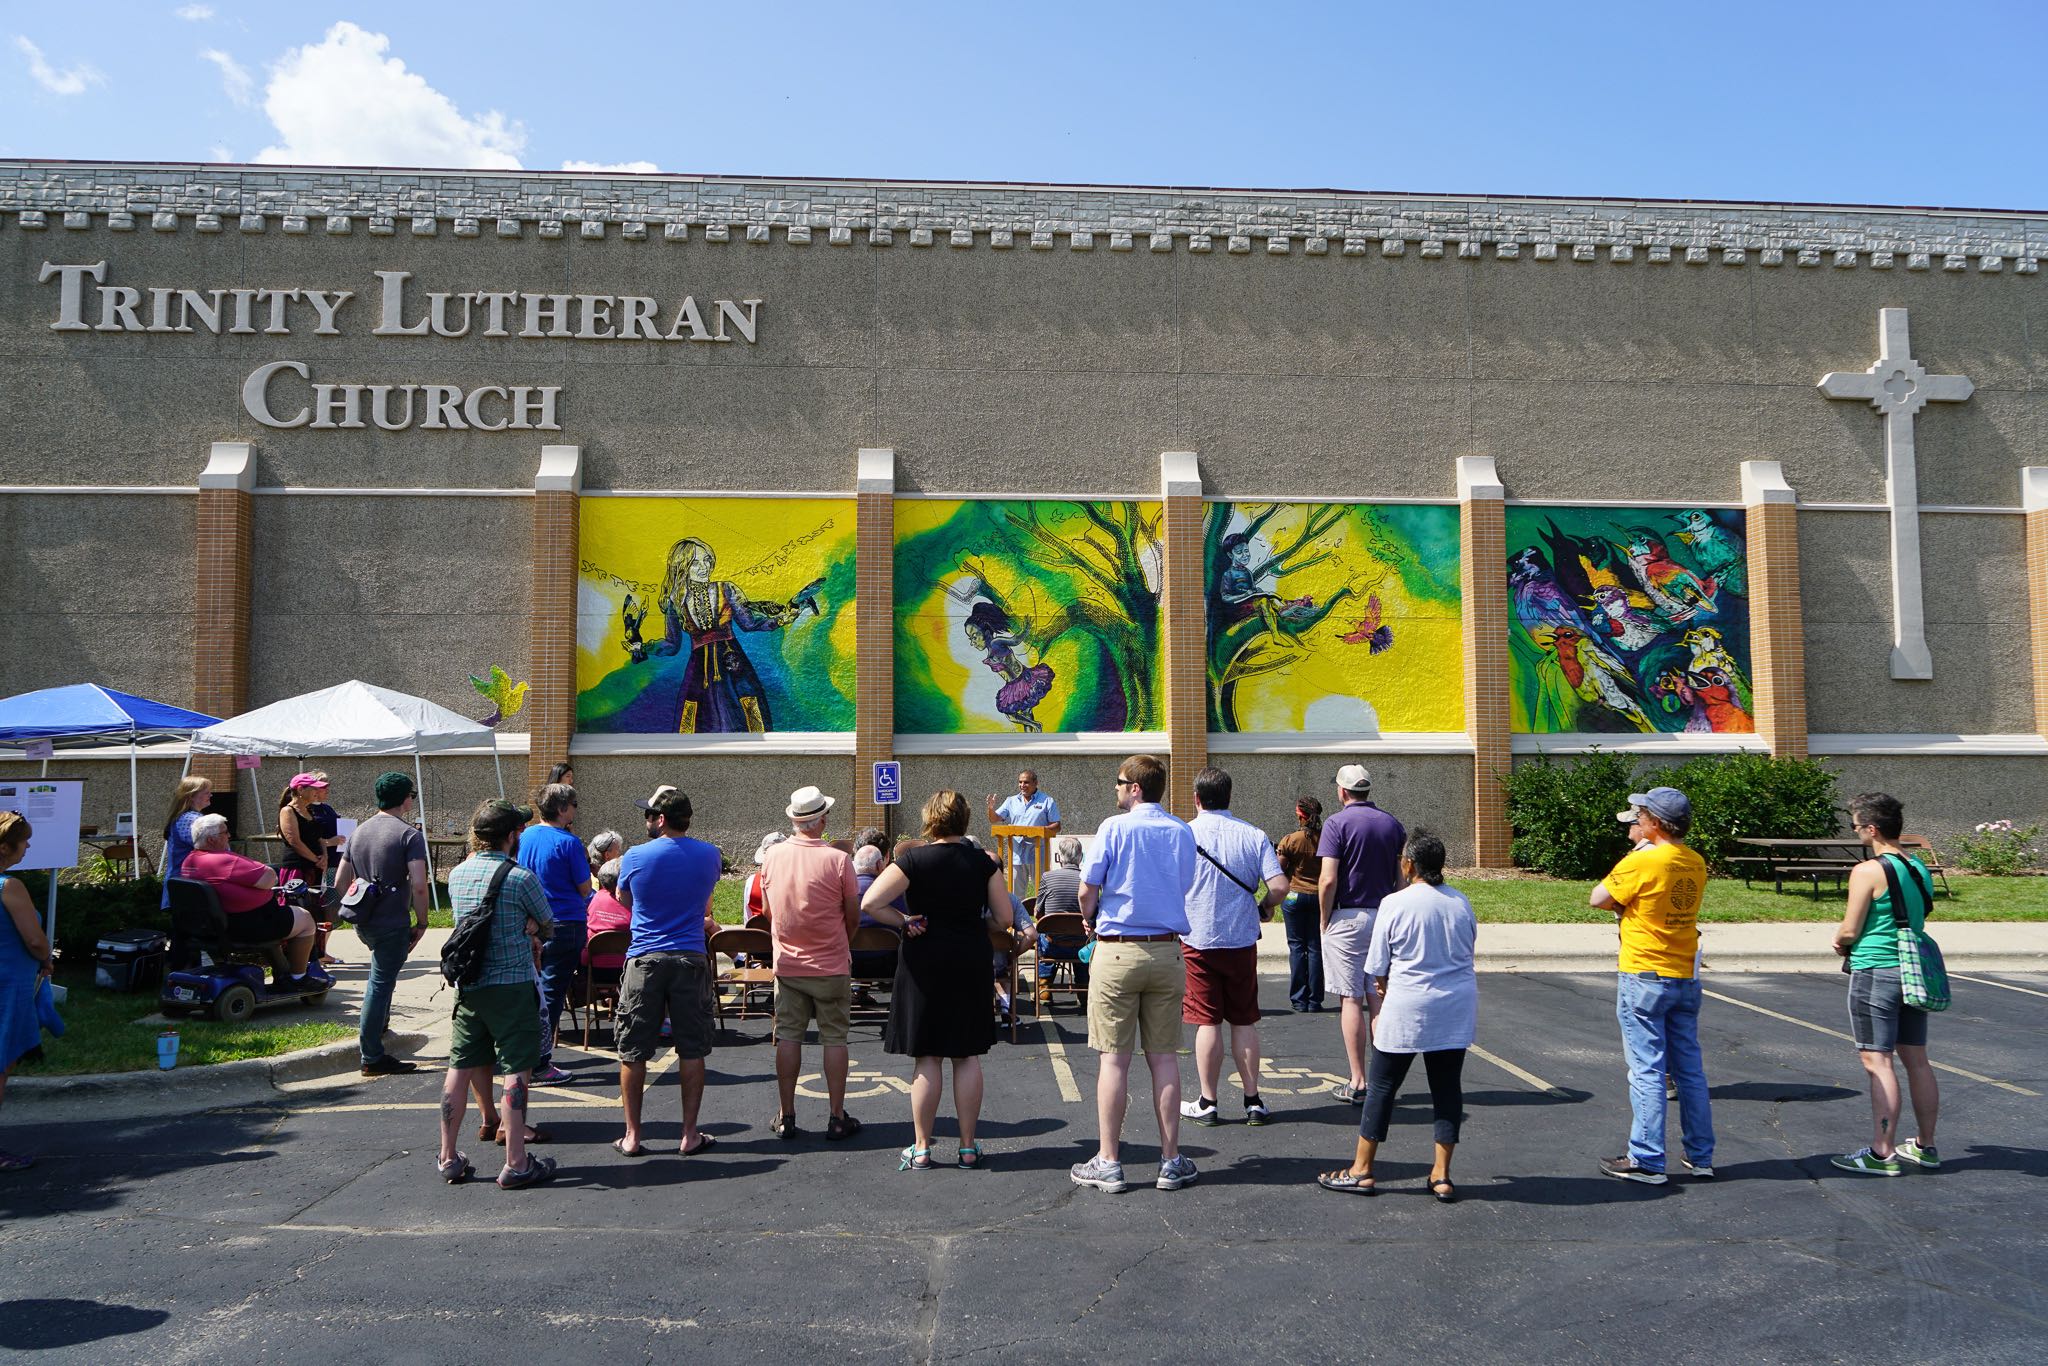 Giant Mural at Lutheran Church with Crowd